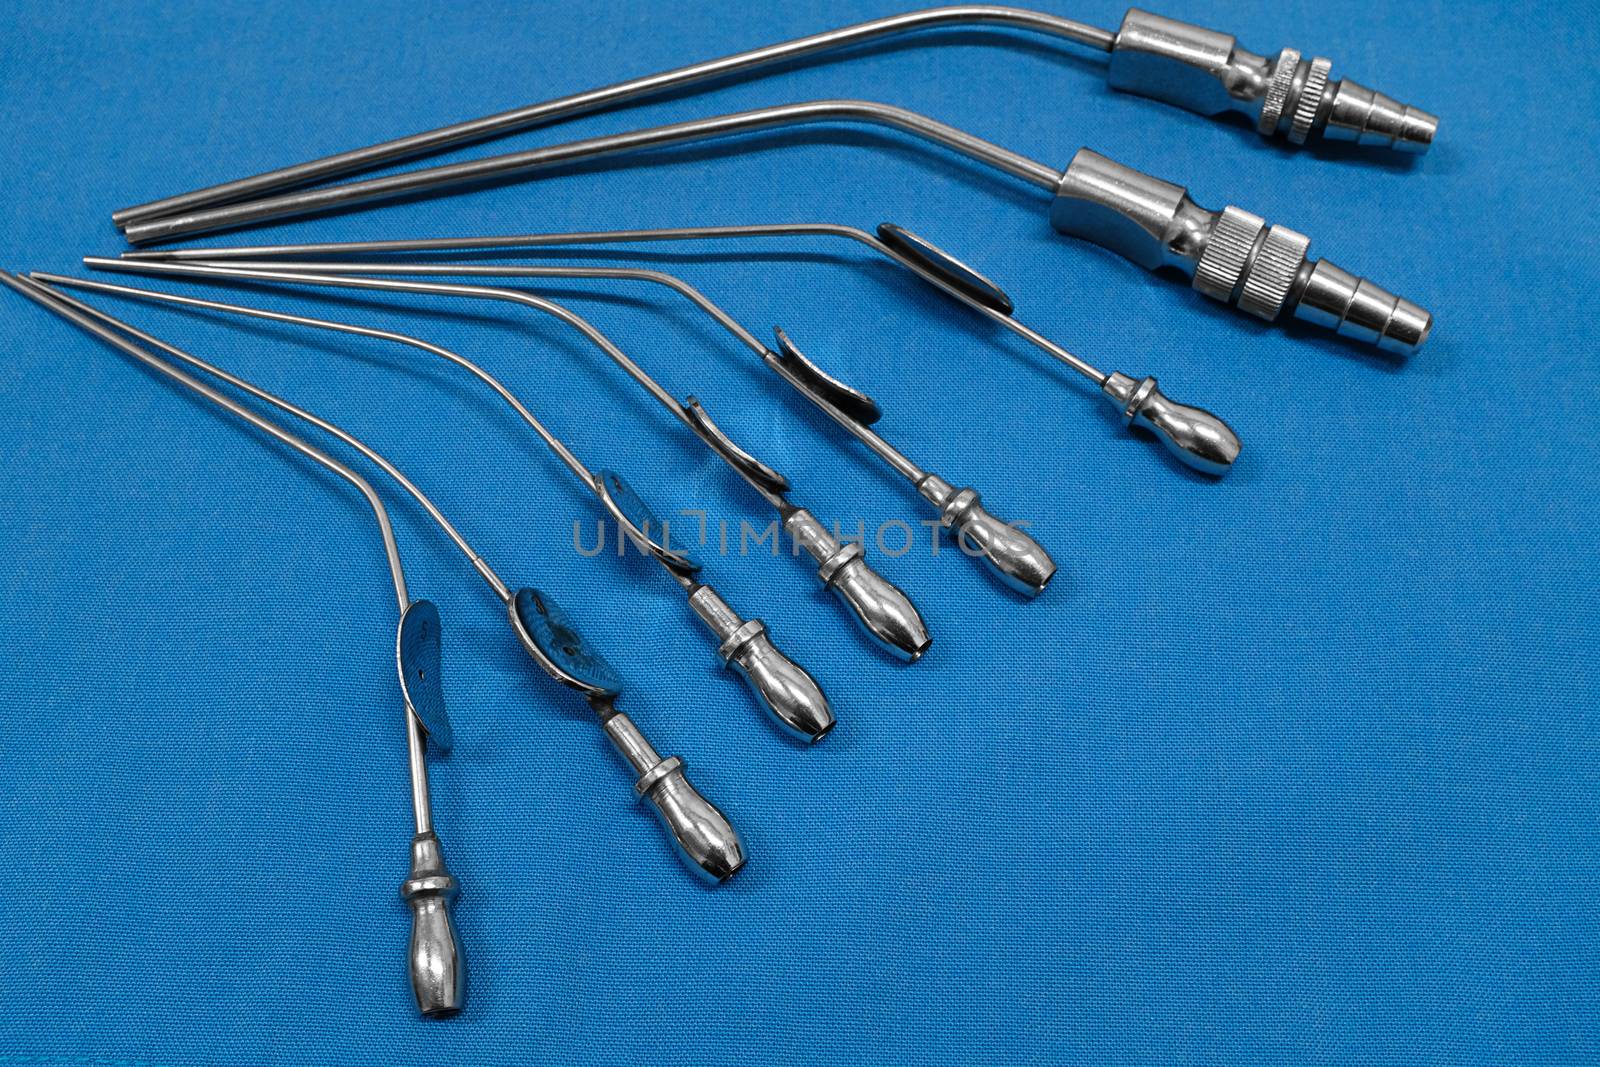 various sizes of ear suction cannula arranged in pattern on top of a blue cloth